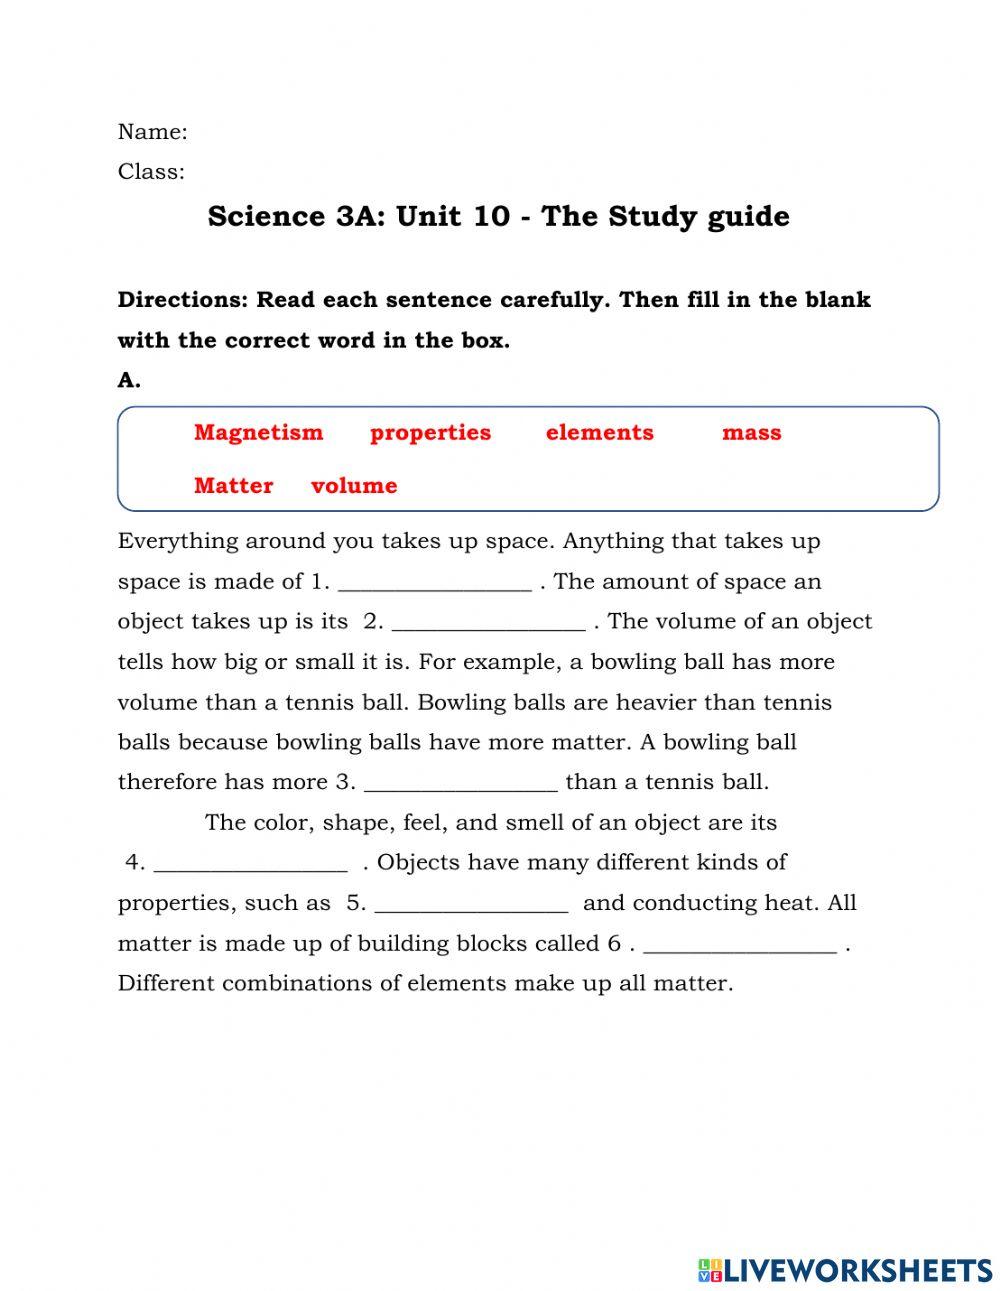 Science Study Guide - Unit 10